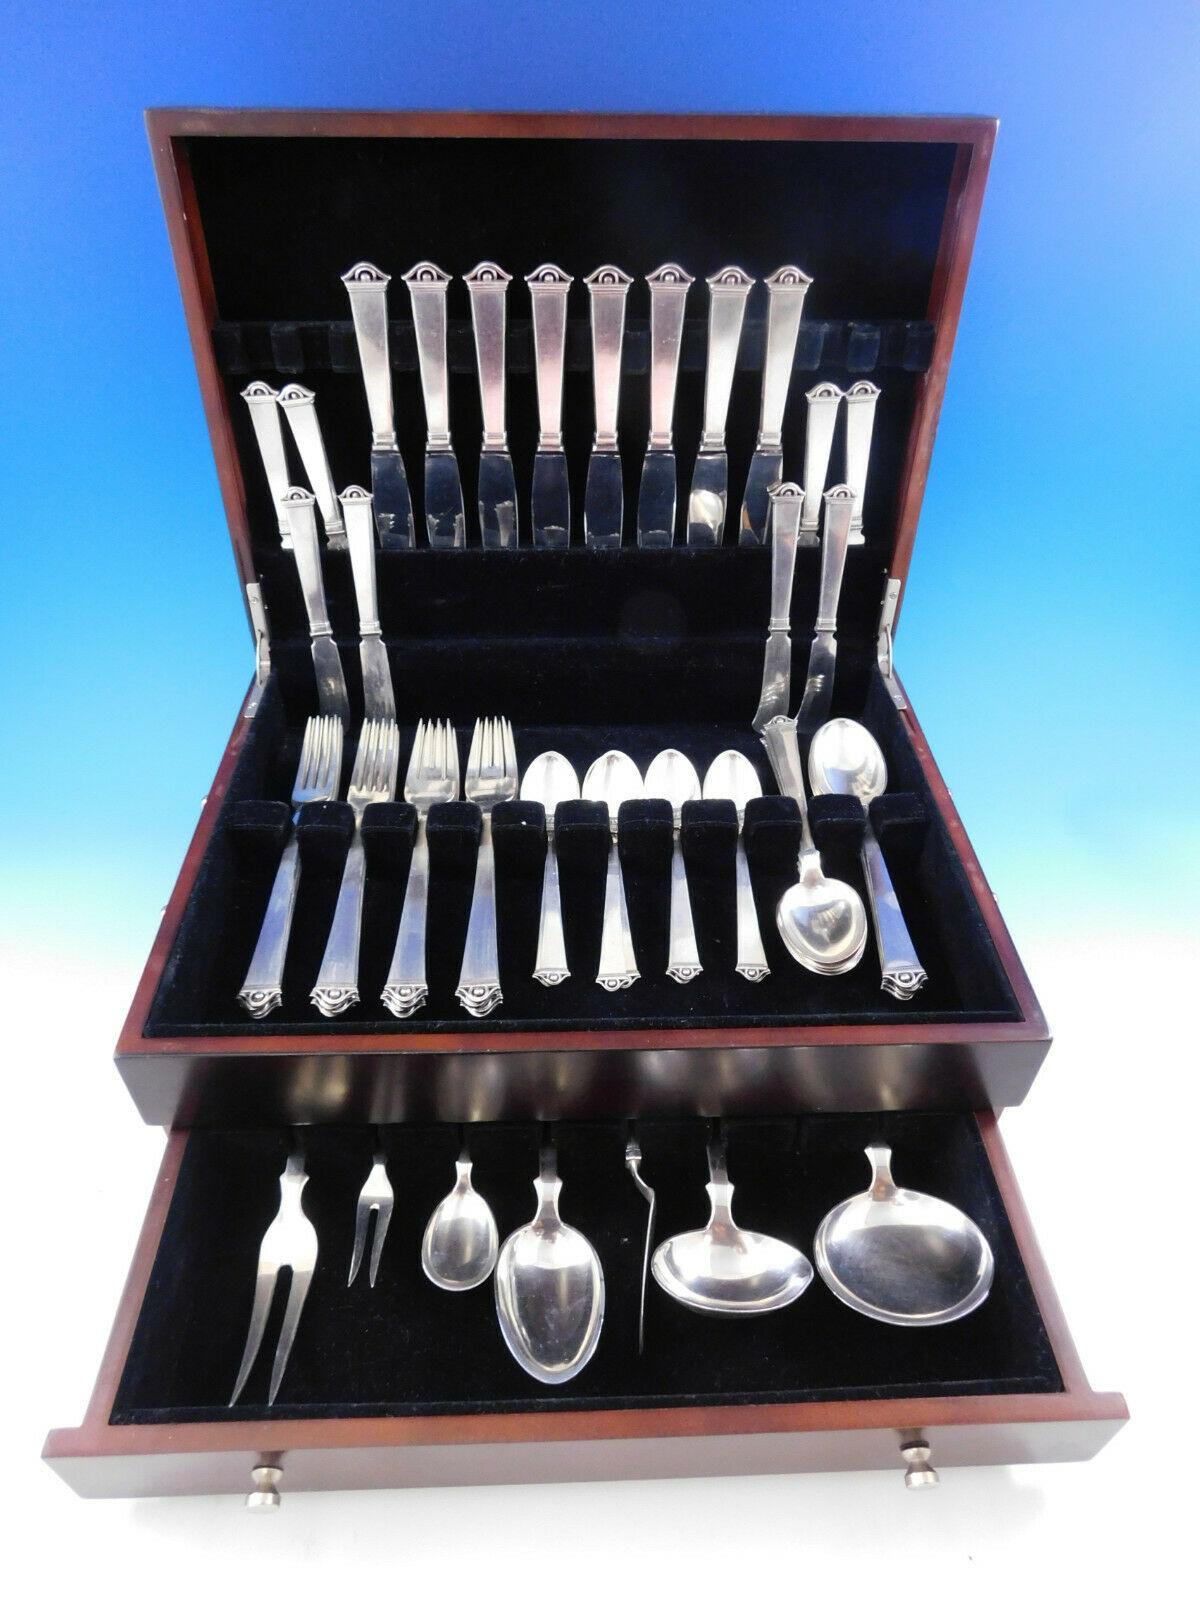 Vendome by Peter Hertz Danish Scandinavian Moderne 830S silver flatware set with modern ball and arch design - 55 Pieces. This set includes:

8 luncheon knives, 8